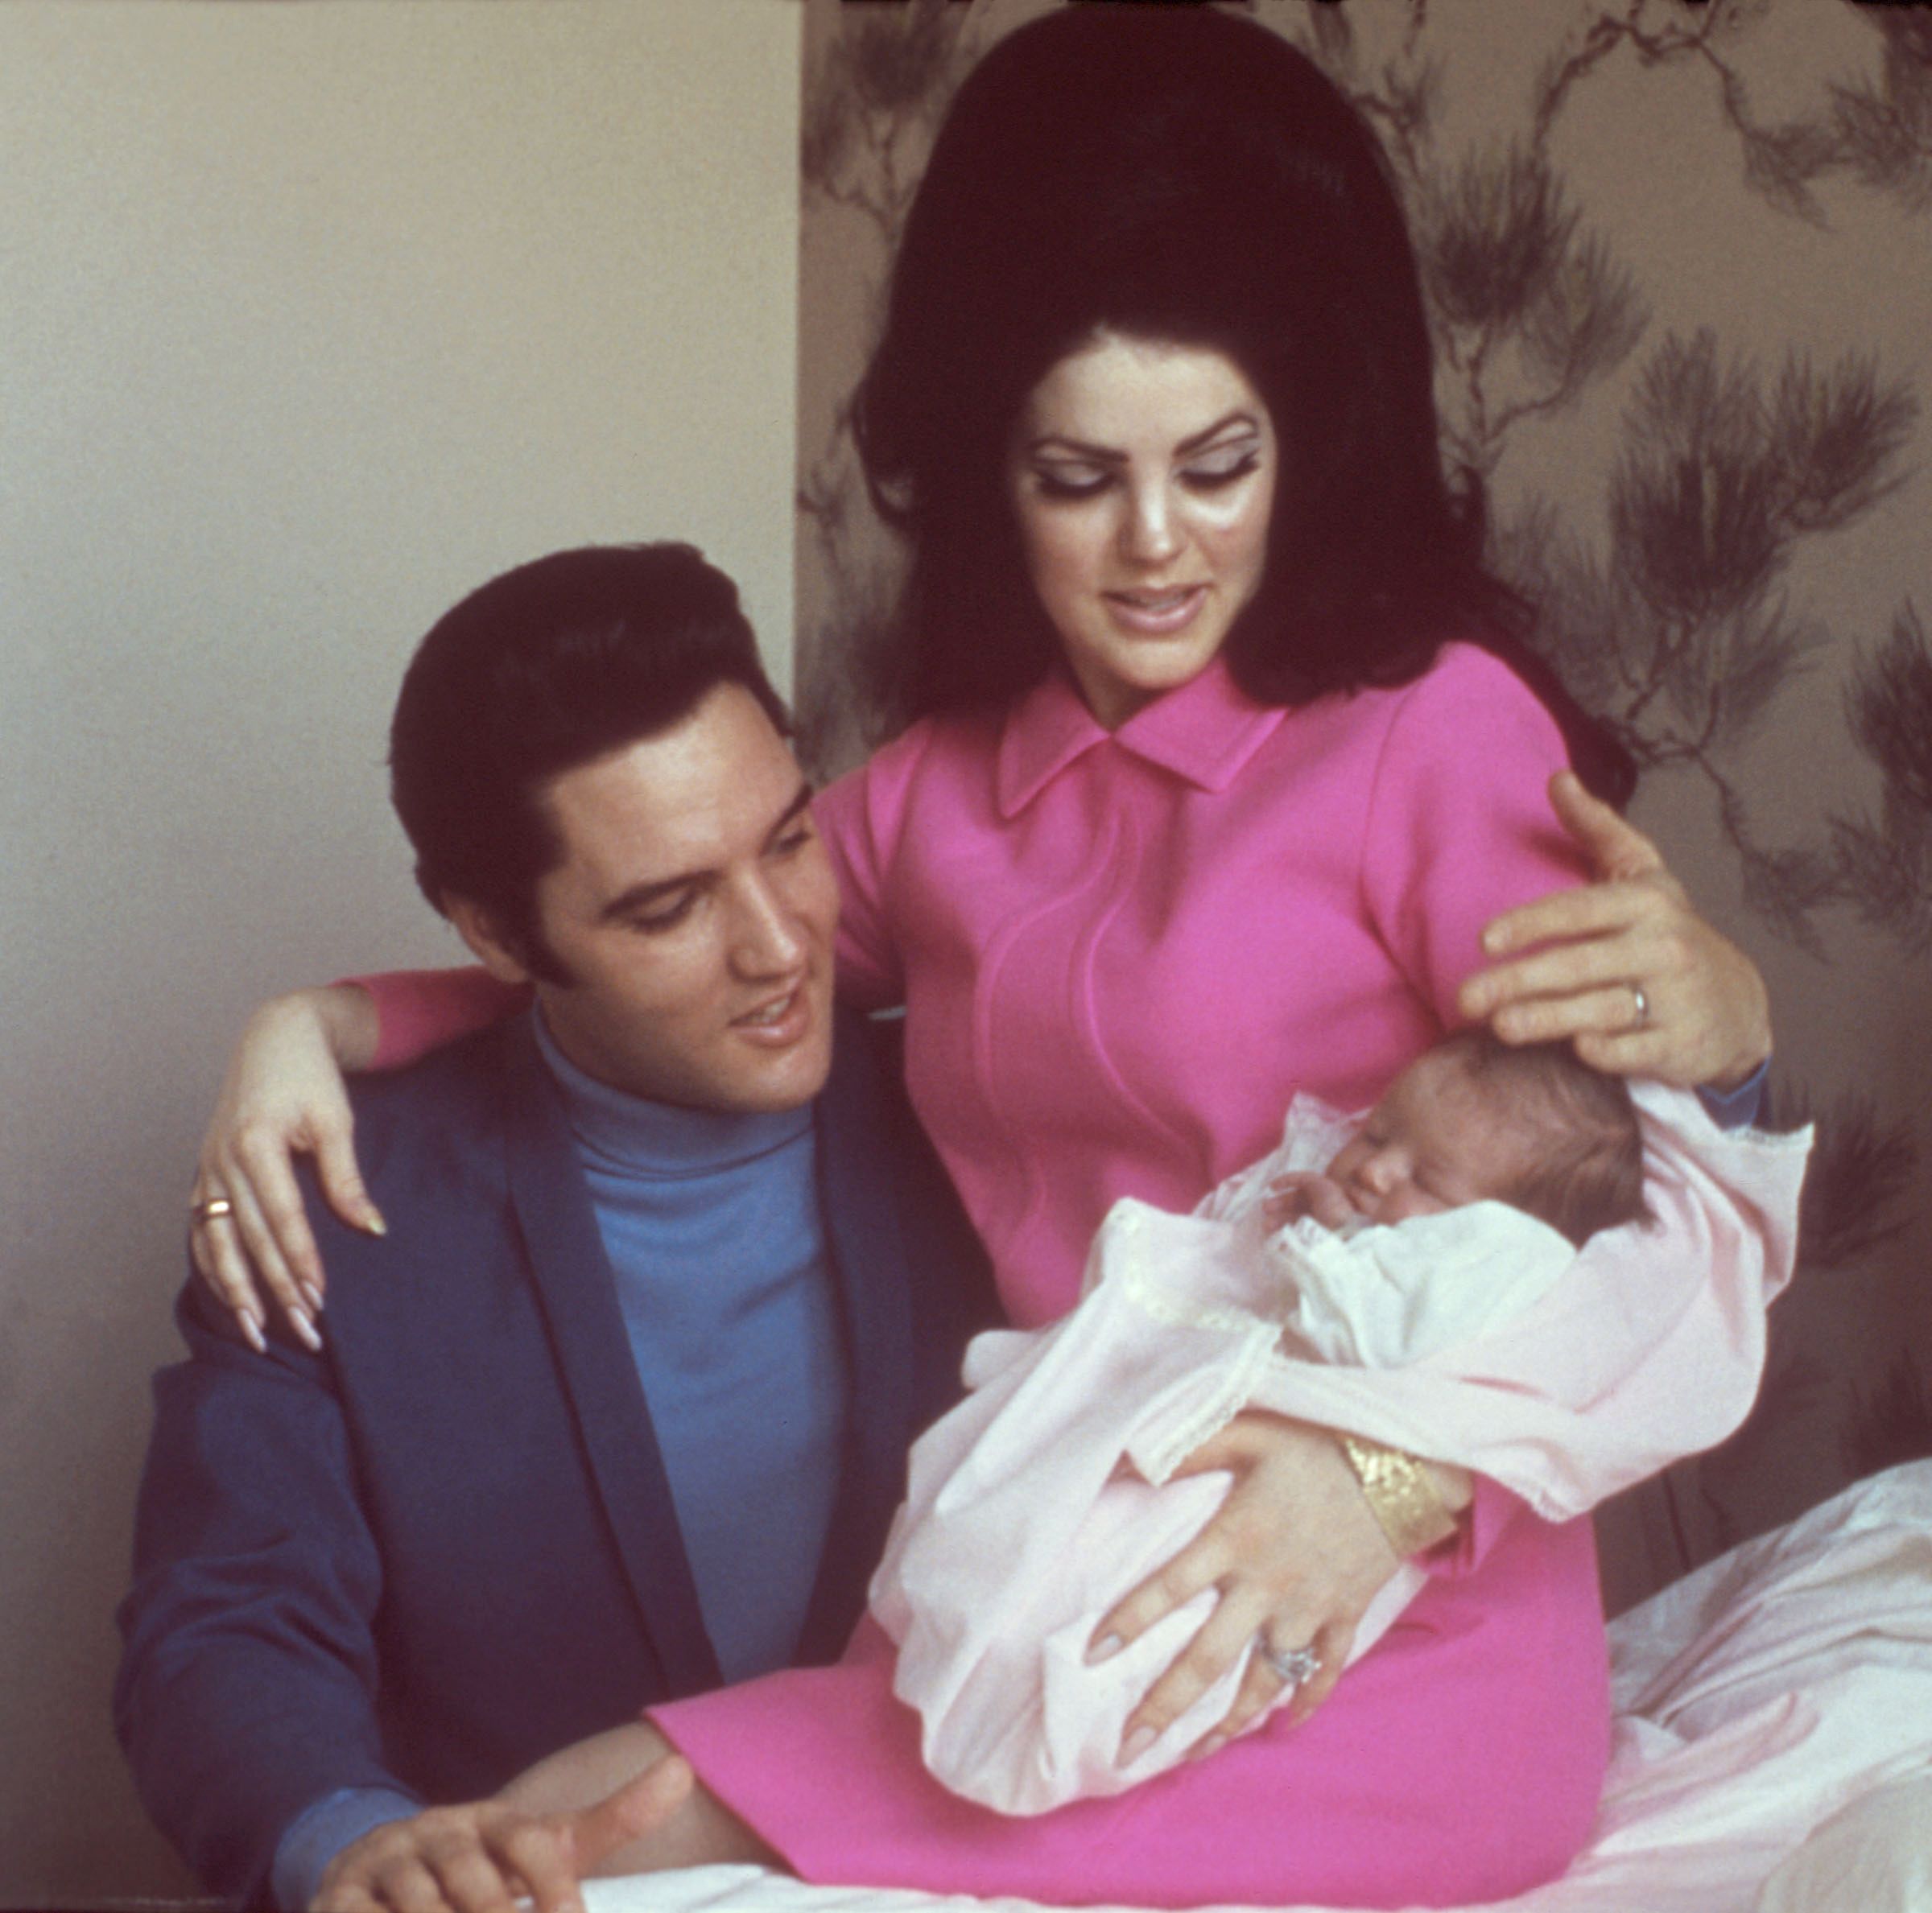 Elvis Presley with Priscilla Beaulieu Presley and their 4-day old daughter Lisa Marie Presley on February 5, 1968, in Memphis, Tennessee. | Source: Michael Ochs Archives/Getty Images